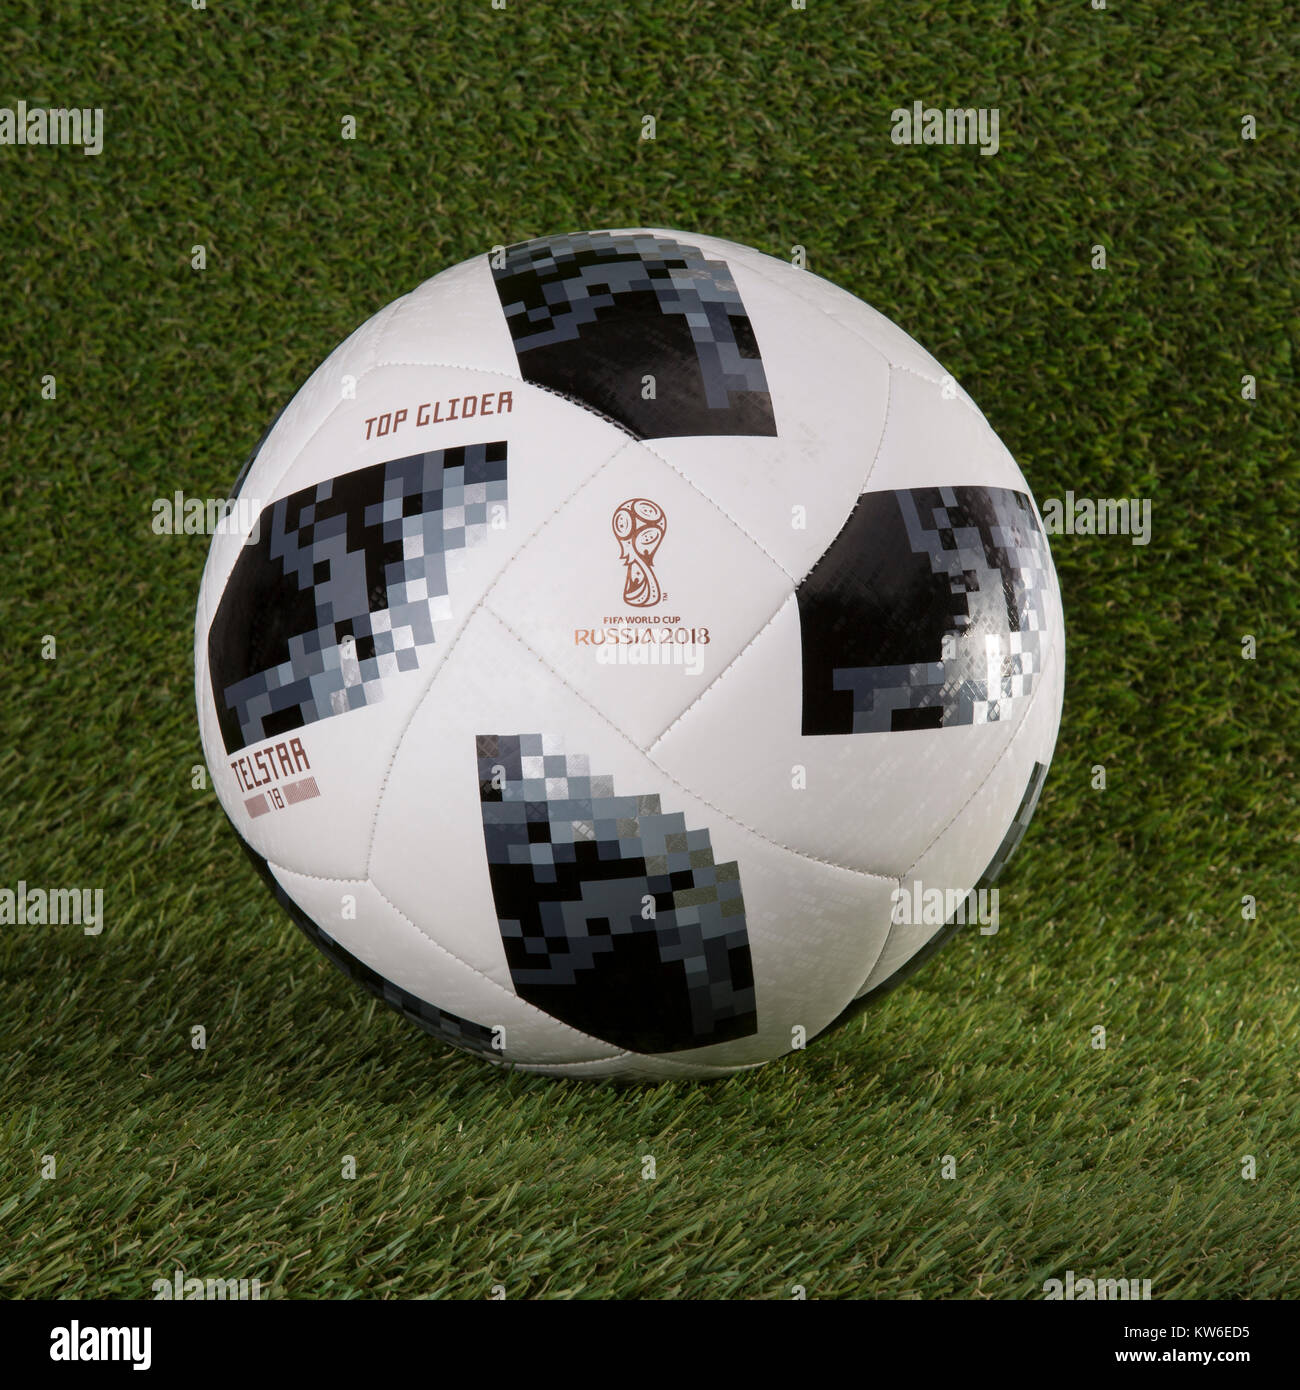 SWINDON, UK - DECEMBER 30, 2017: Adidas Telstar Top Glider World Cup 2018 Football, The Official Matchball for the 2018 Russia World Cup. Stock Photo